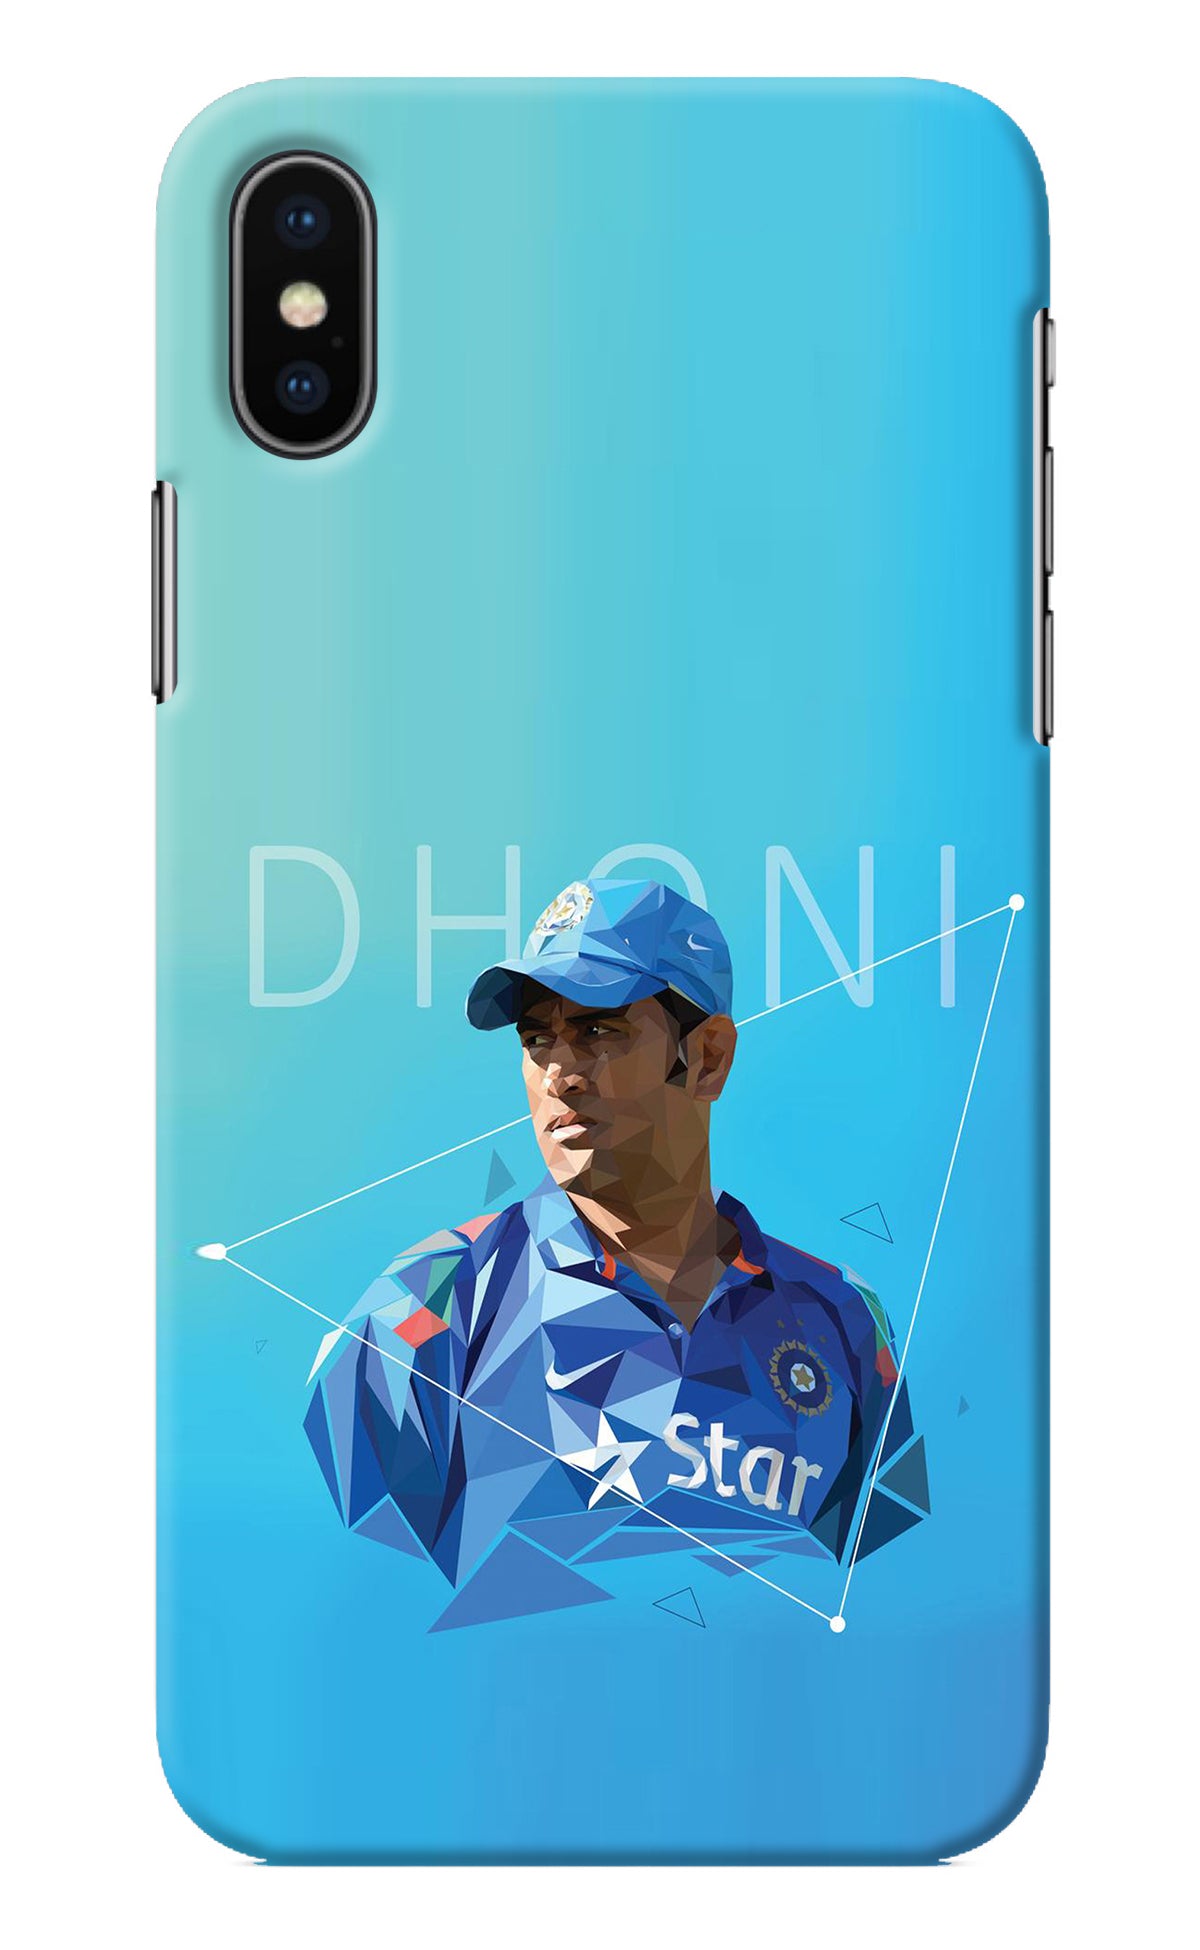 Dhoni Artwork iPhone XS Back Cover